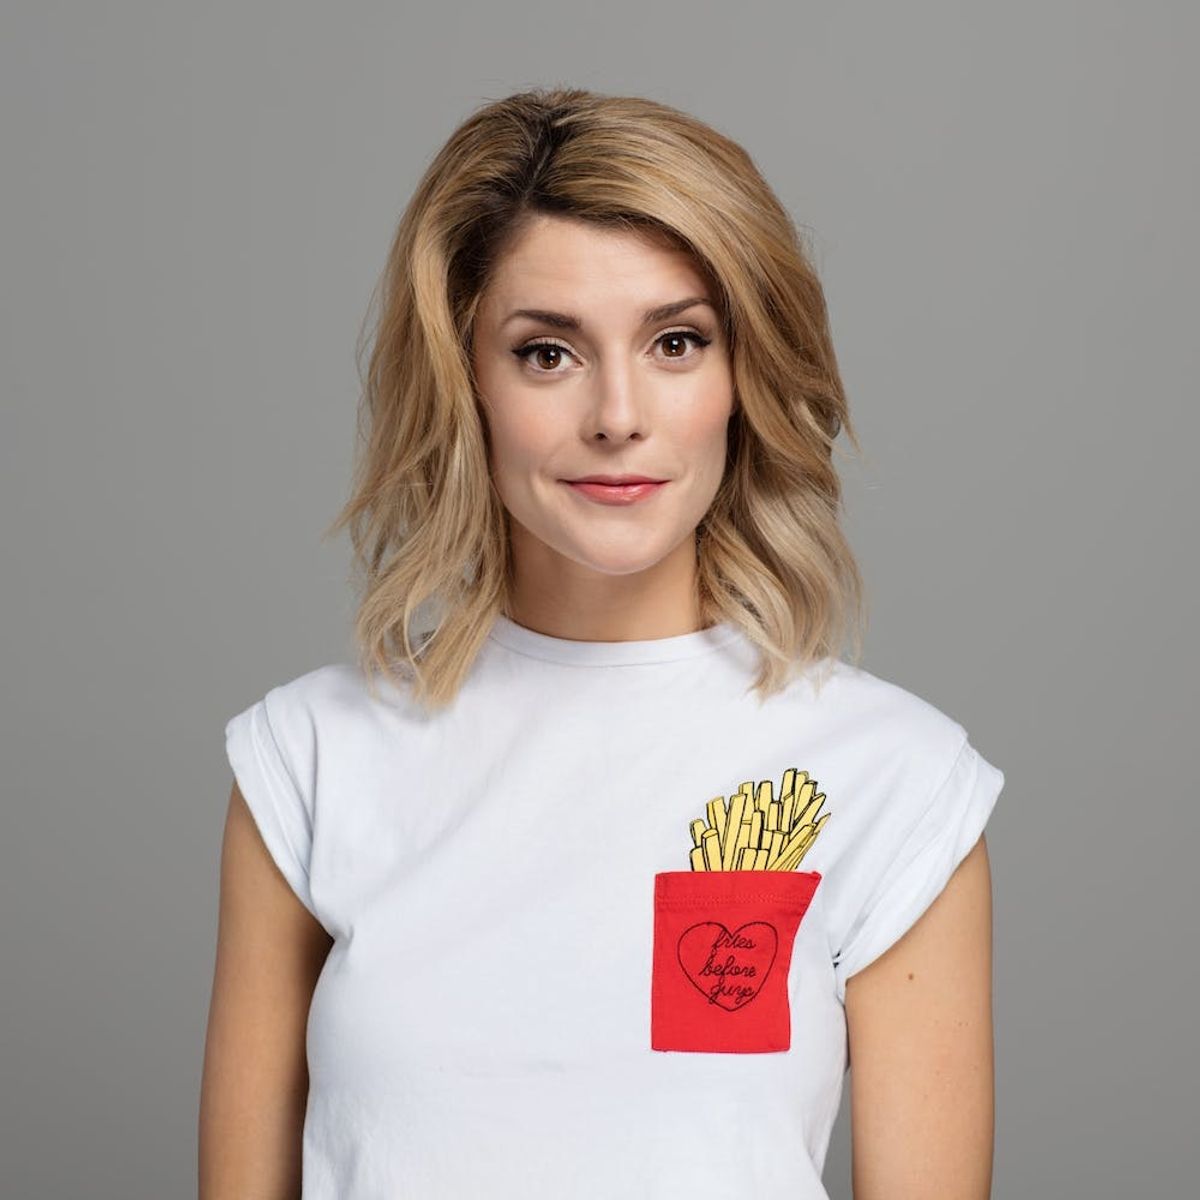 YouTube Star Grace Helbig Talks Inspiration, Everyday Pajamas and Her Beauty Blender